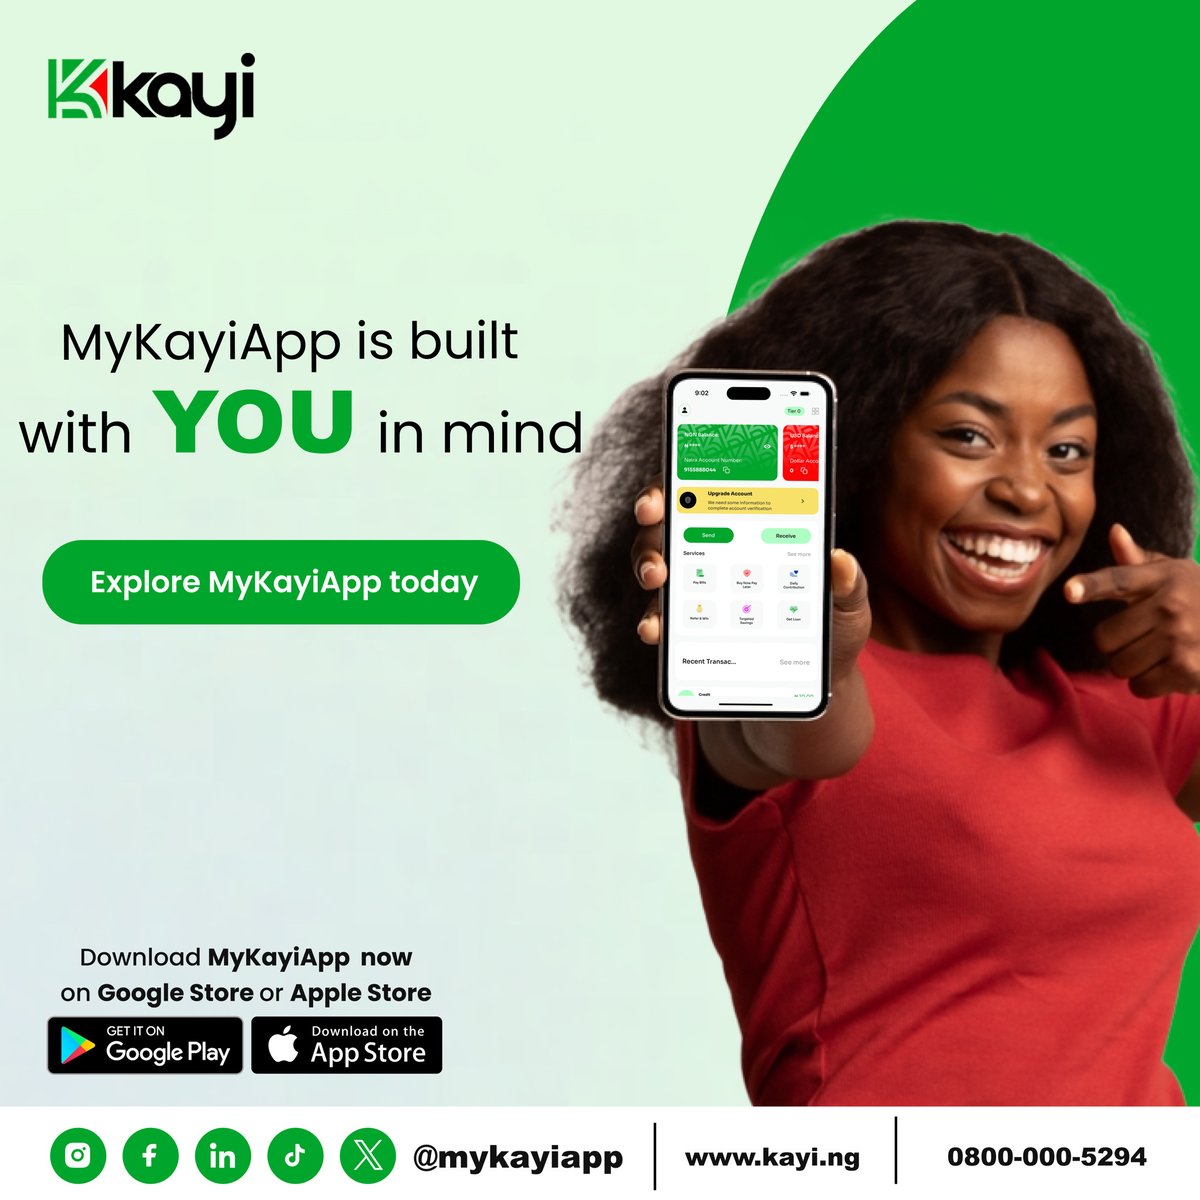 Hey, millennials! Kayiapp is designed just for you, offering a modern, user-friendly banking experience. Download now on Google Play Store, or Apple Store.

#MyKayiApp #NowLive #Kayiway #DownloadNow #Bankingwithoutlimits #downloadmykayiapp